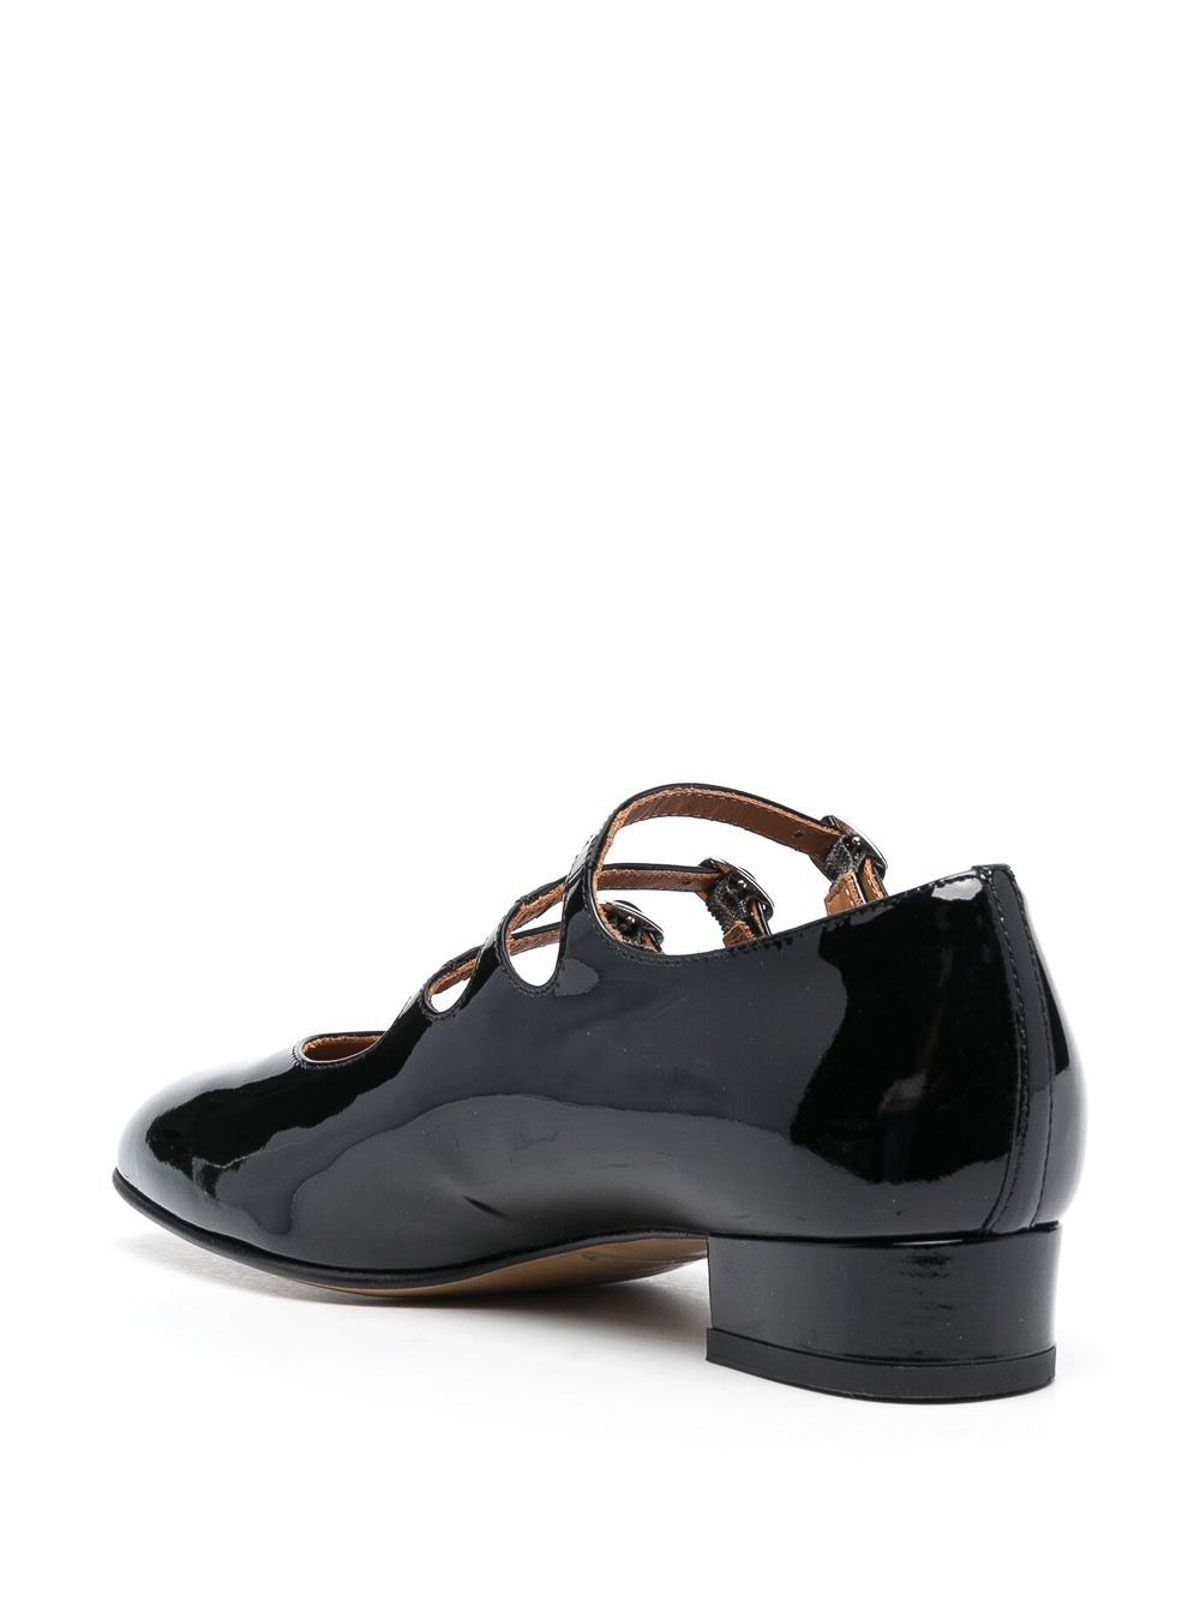 ARIANA black patent leather Mary Janes ballet flats